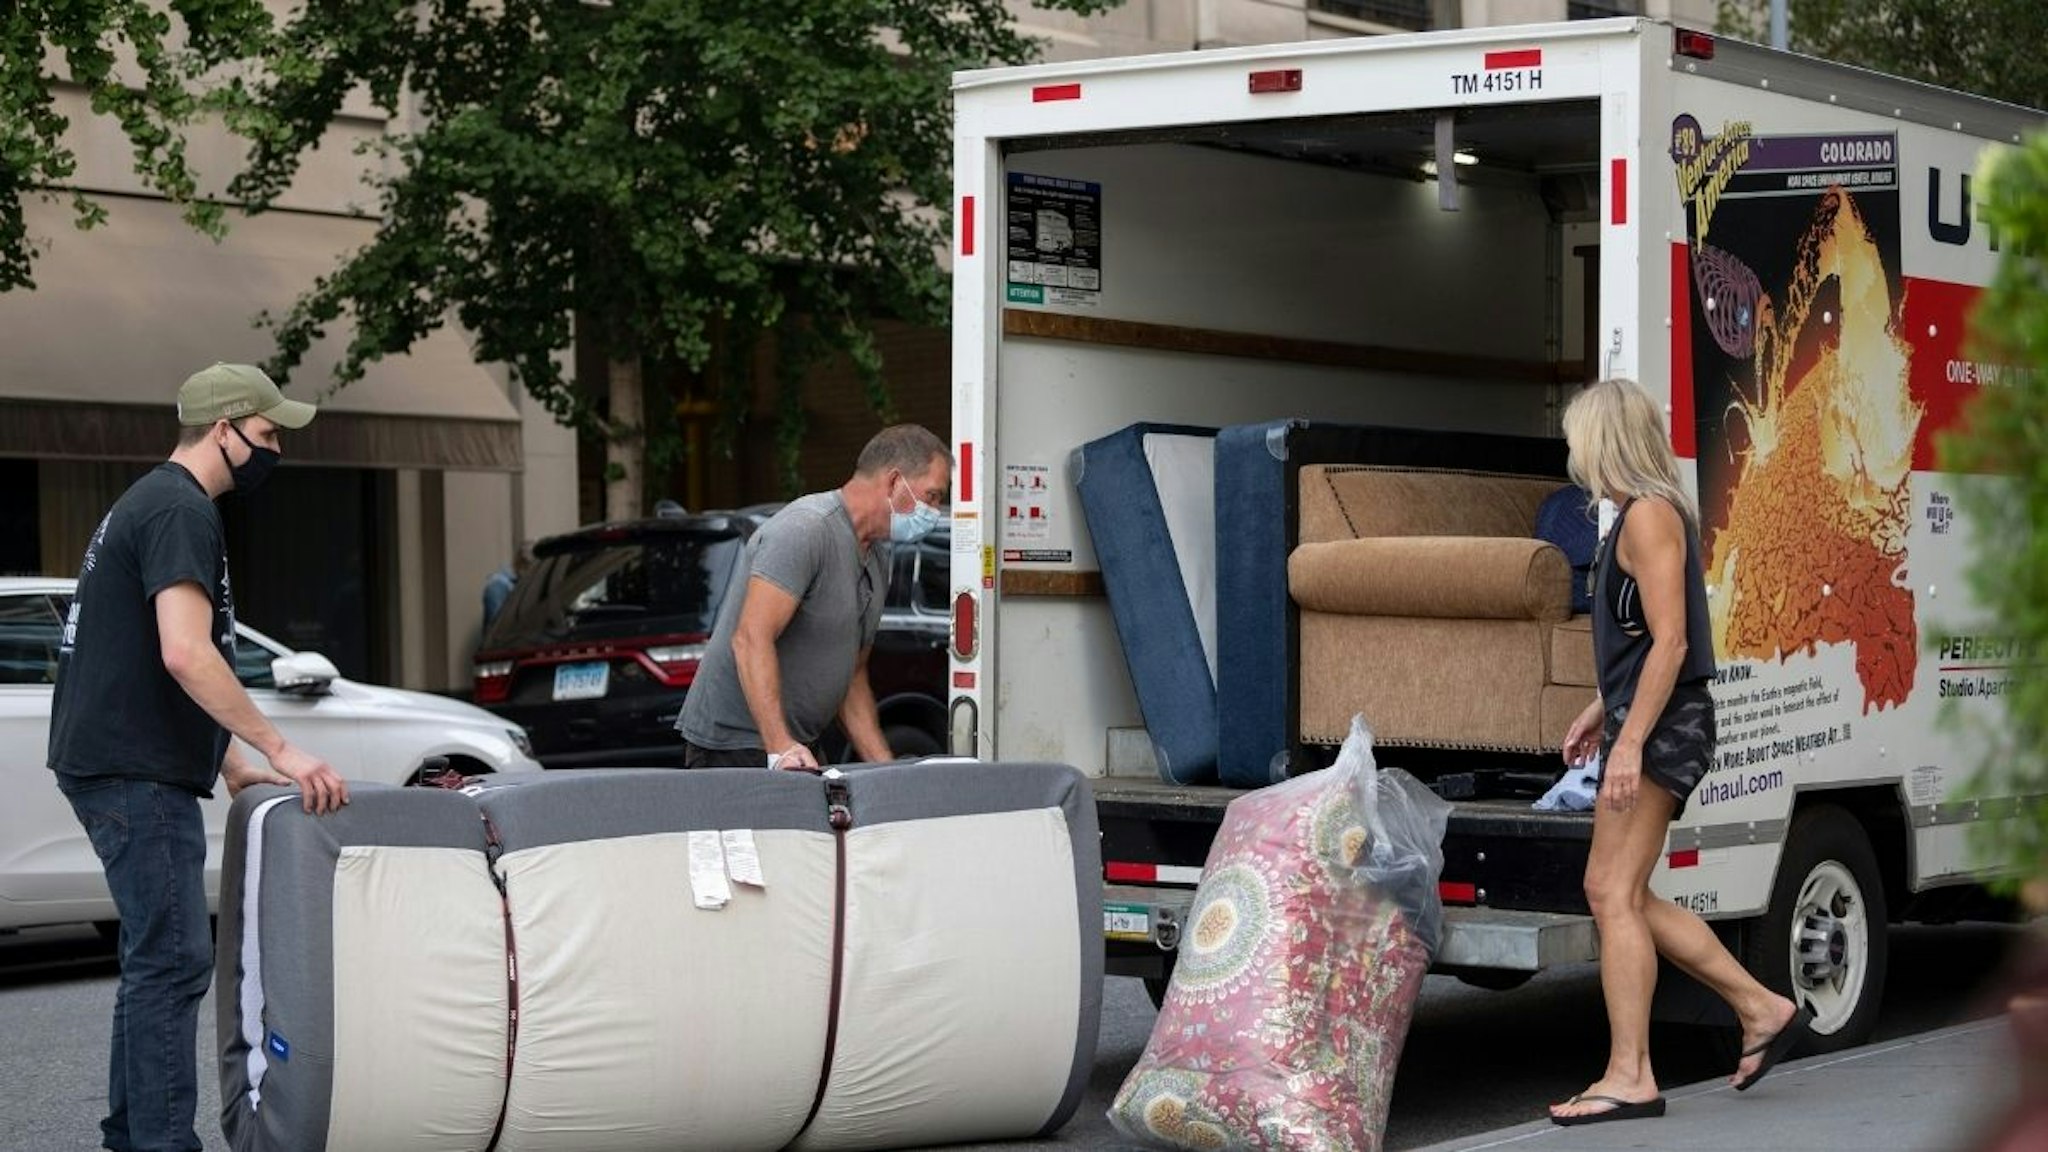 People wearing masks load furniture into a U-haul moving truck as the city continues Phase 4 of re-opening following restrictions imposed to slow the spread of coronavirus on September 12, 2020 in New York City.